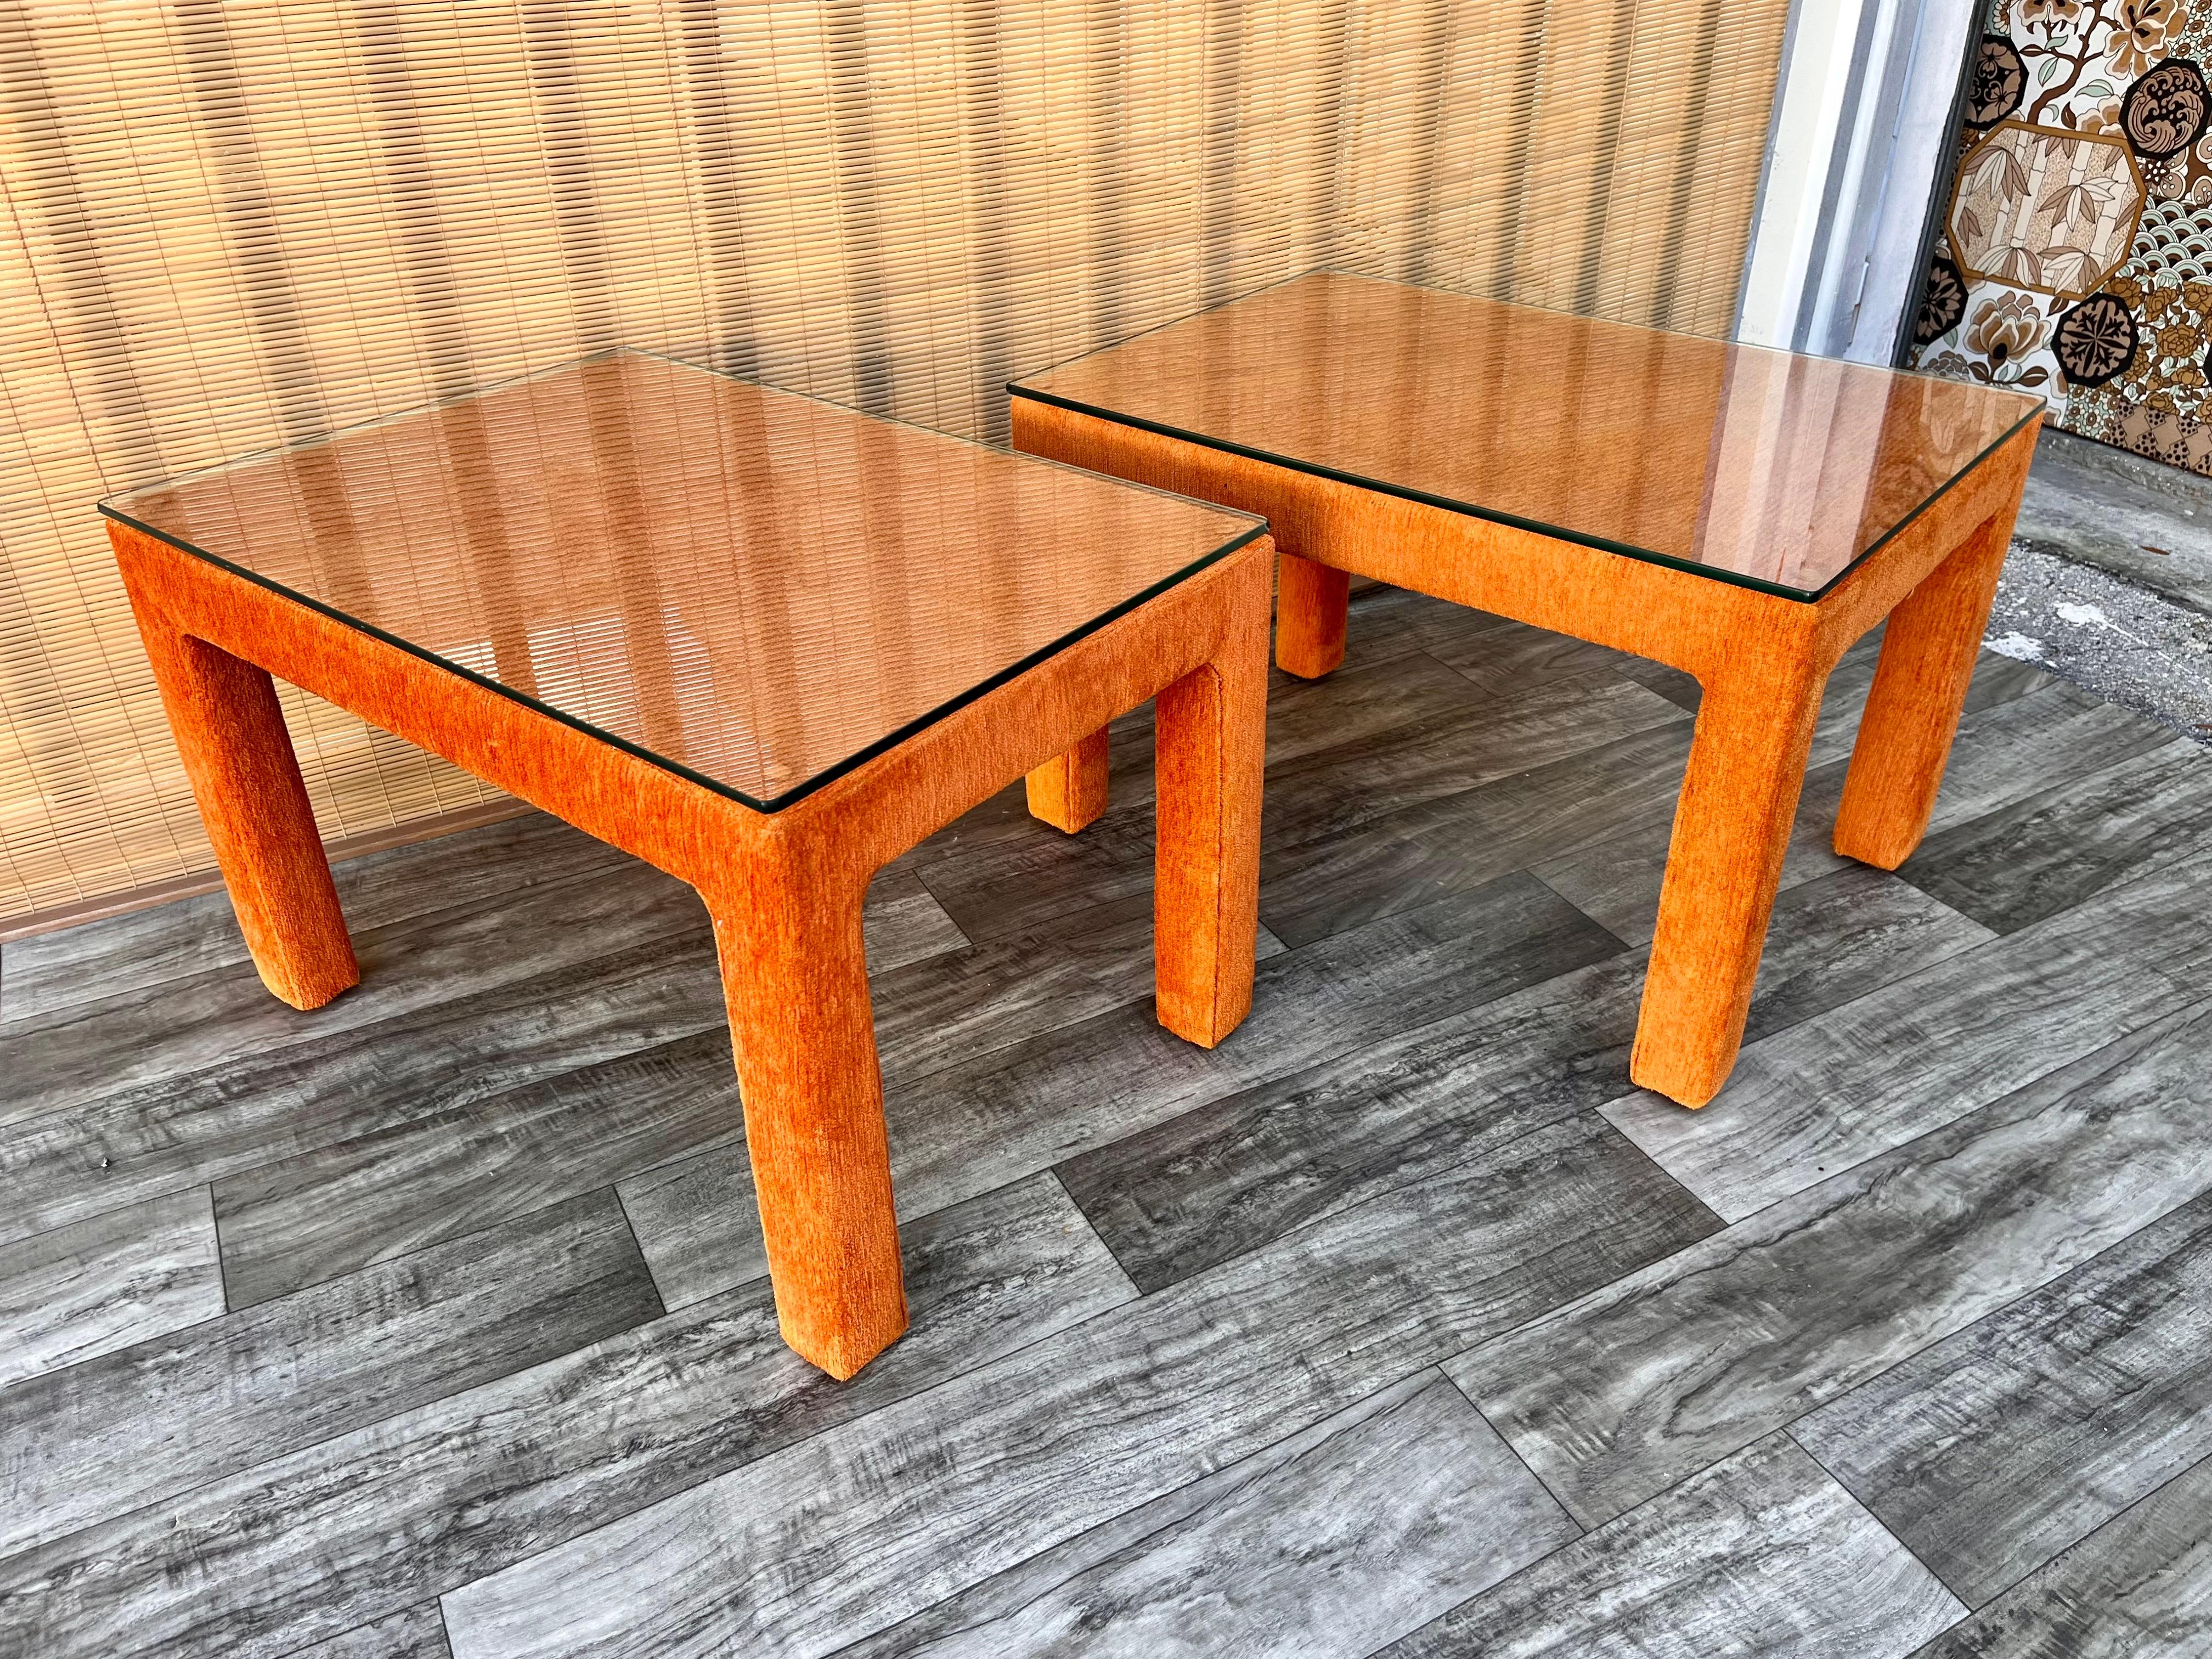 Pair of Mid-Century Modern Fully Upholstered Side Tables, circa 1970s For Sale 3